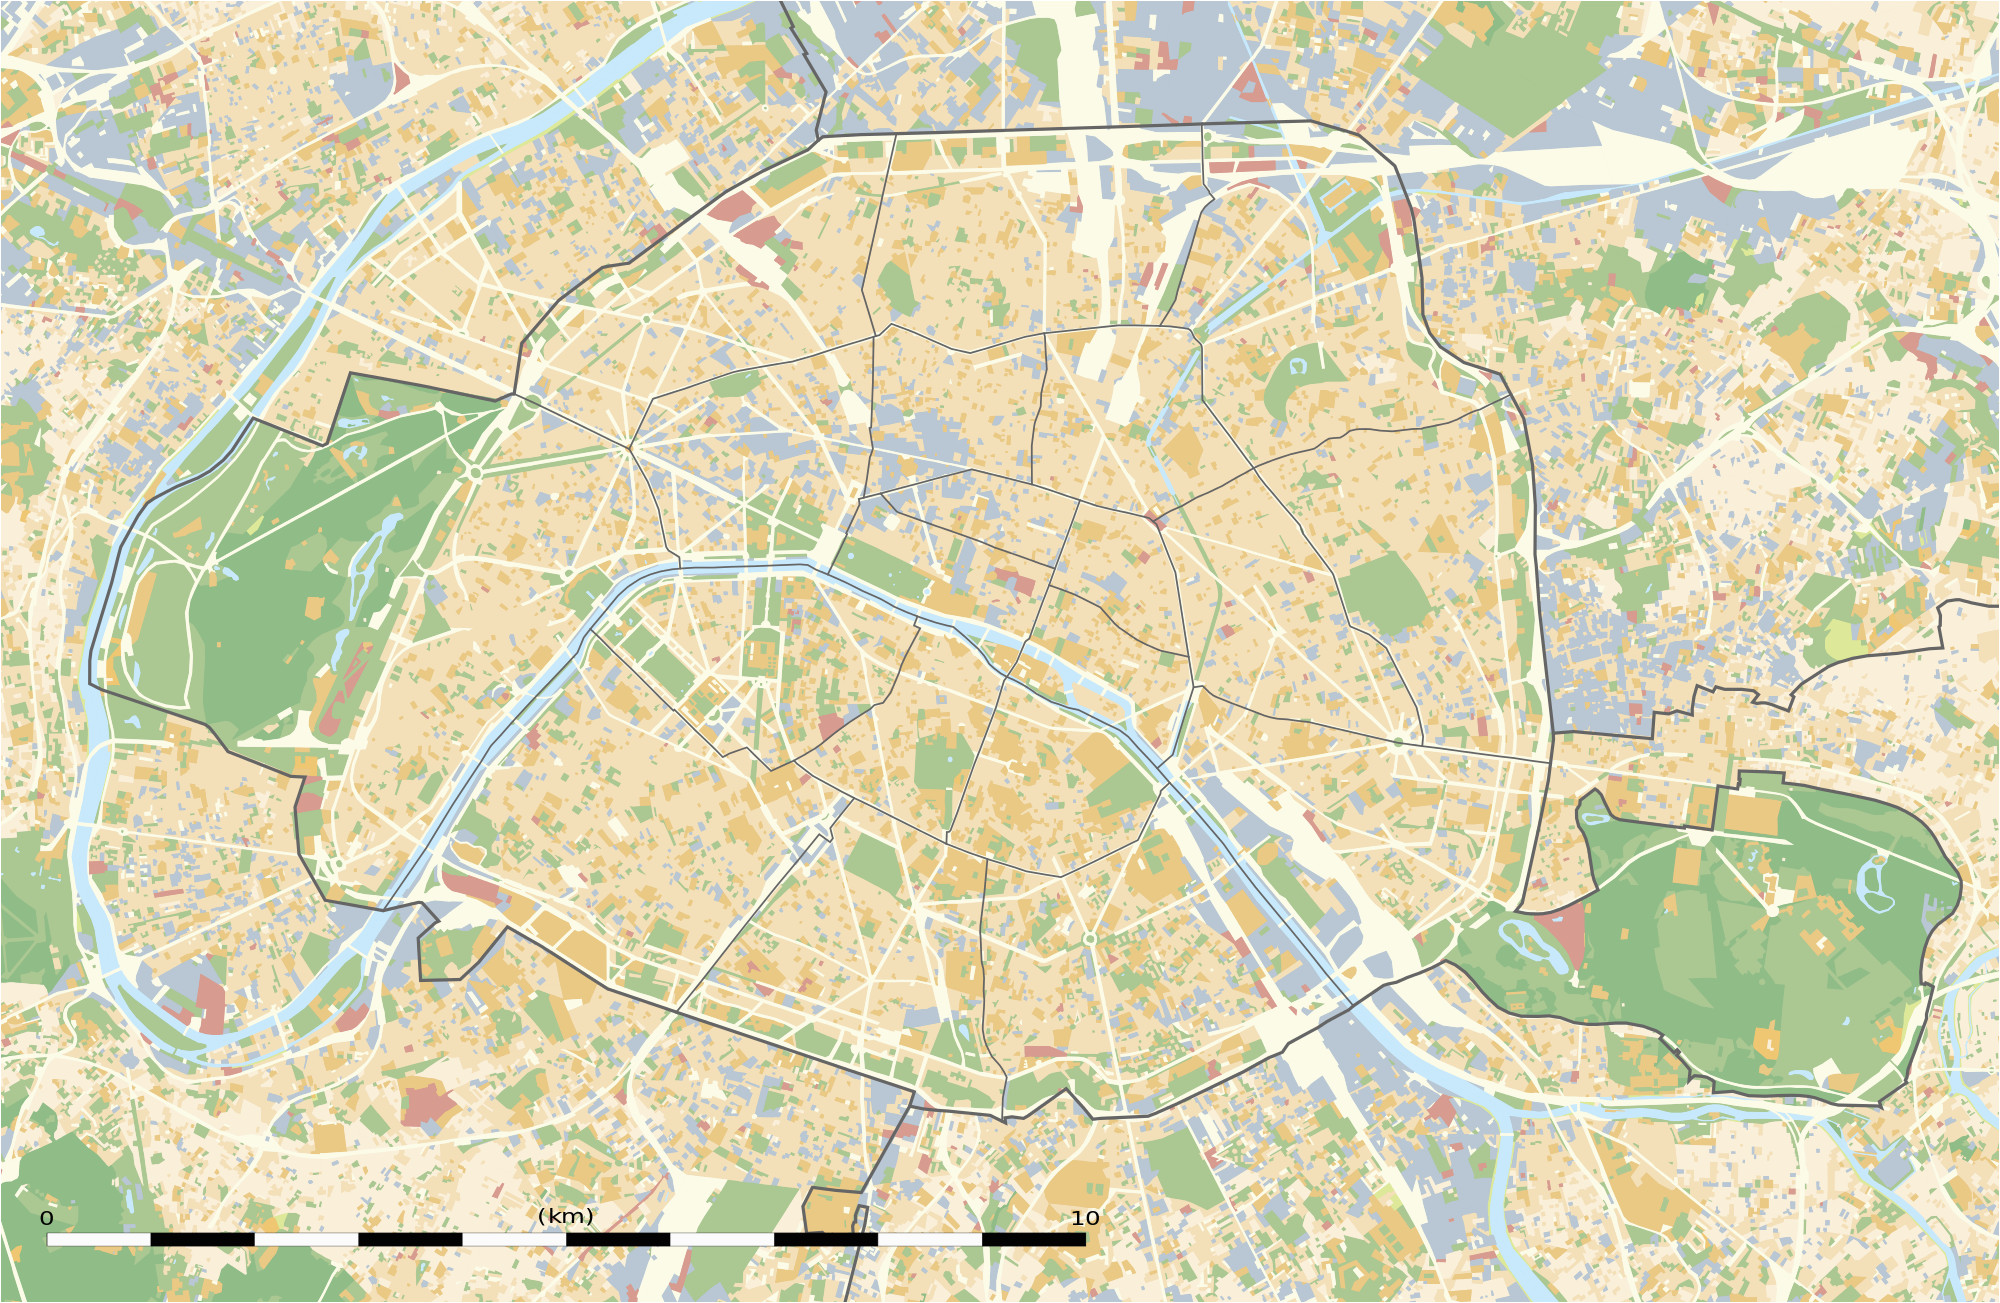 Map Of Central Paris France Maps Of Paris Wikimedia Commons